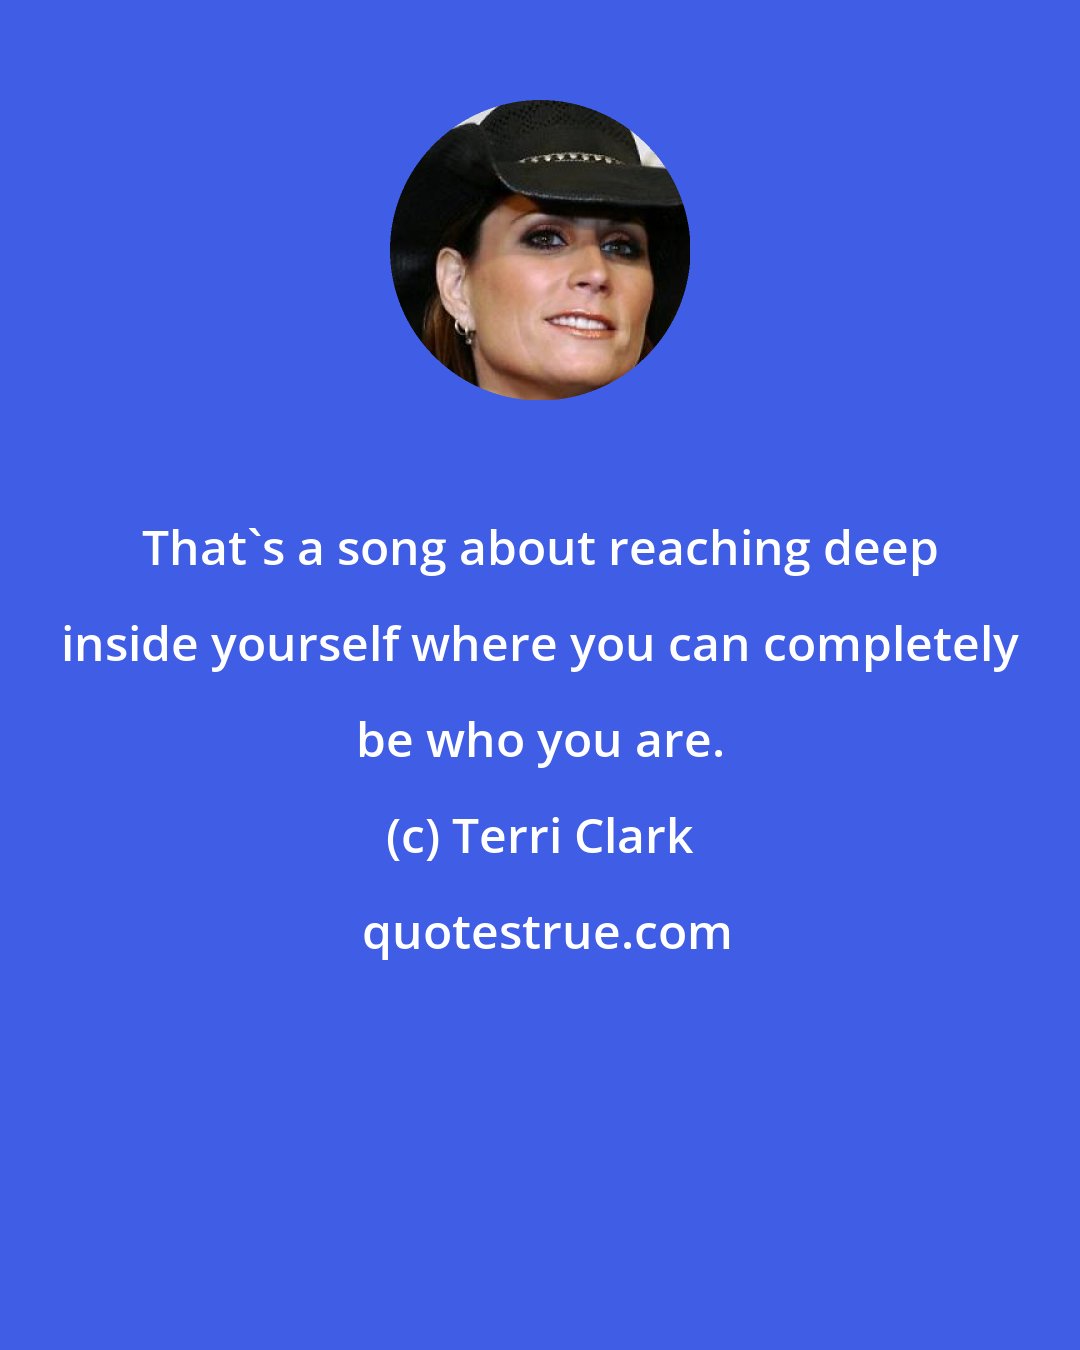 Terri Clark: That's a song about reaching deep inside yourself where you can completely be who you are.